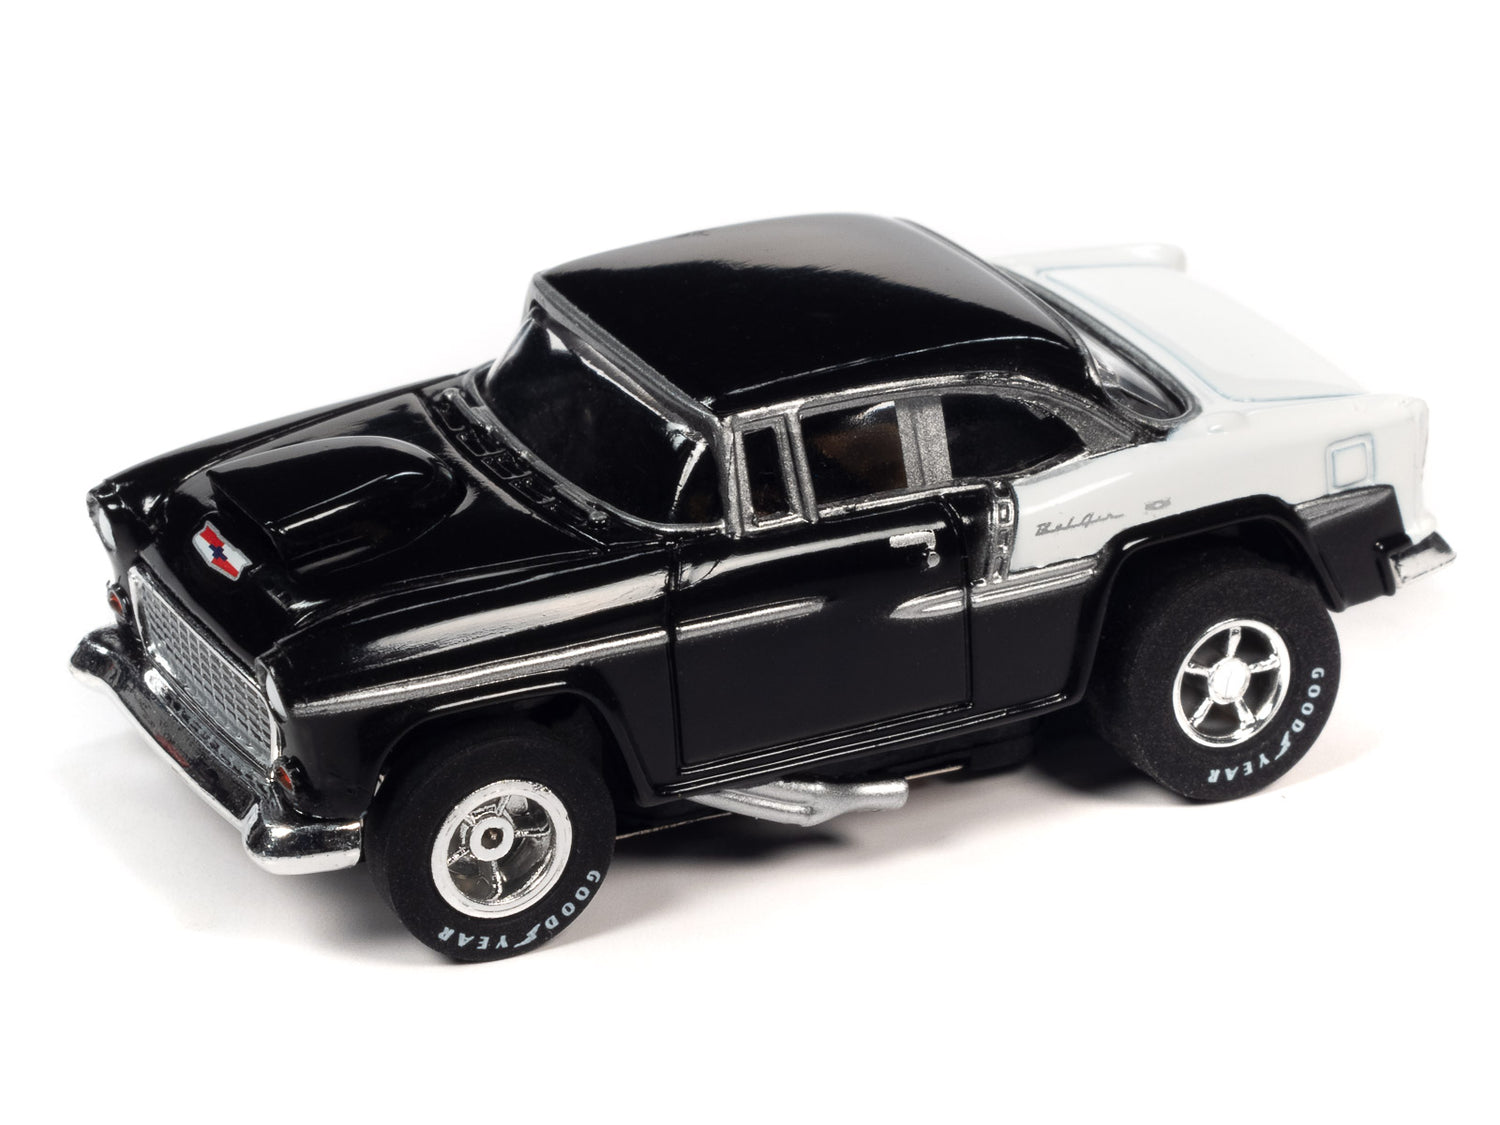 Auto World Xtraction 1955 Chevy Bel Air (Black/White) HO Slot Car